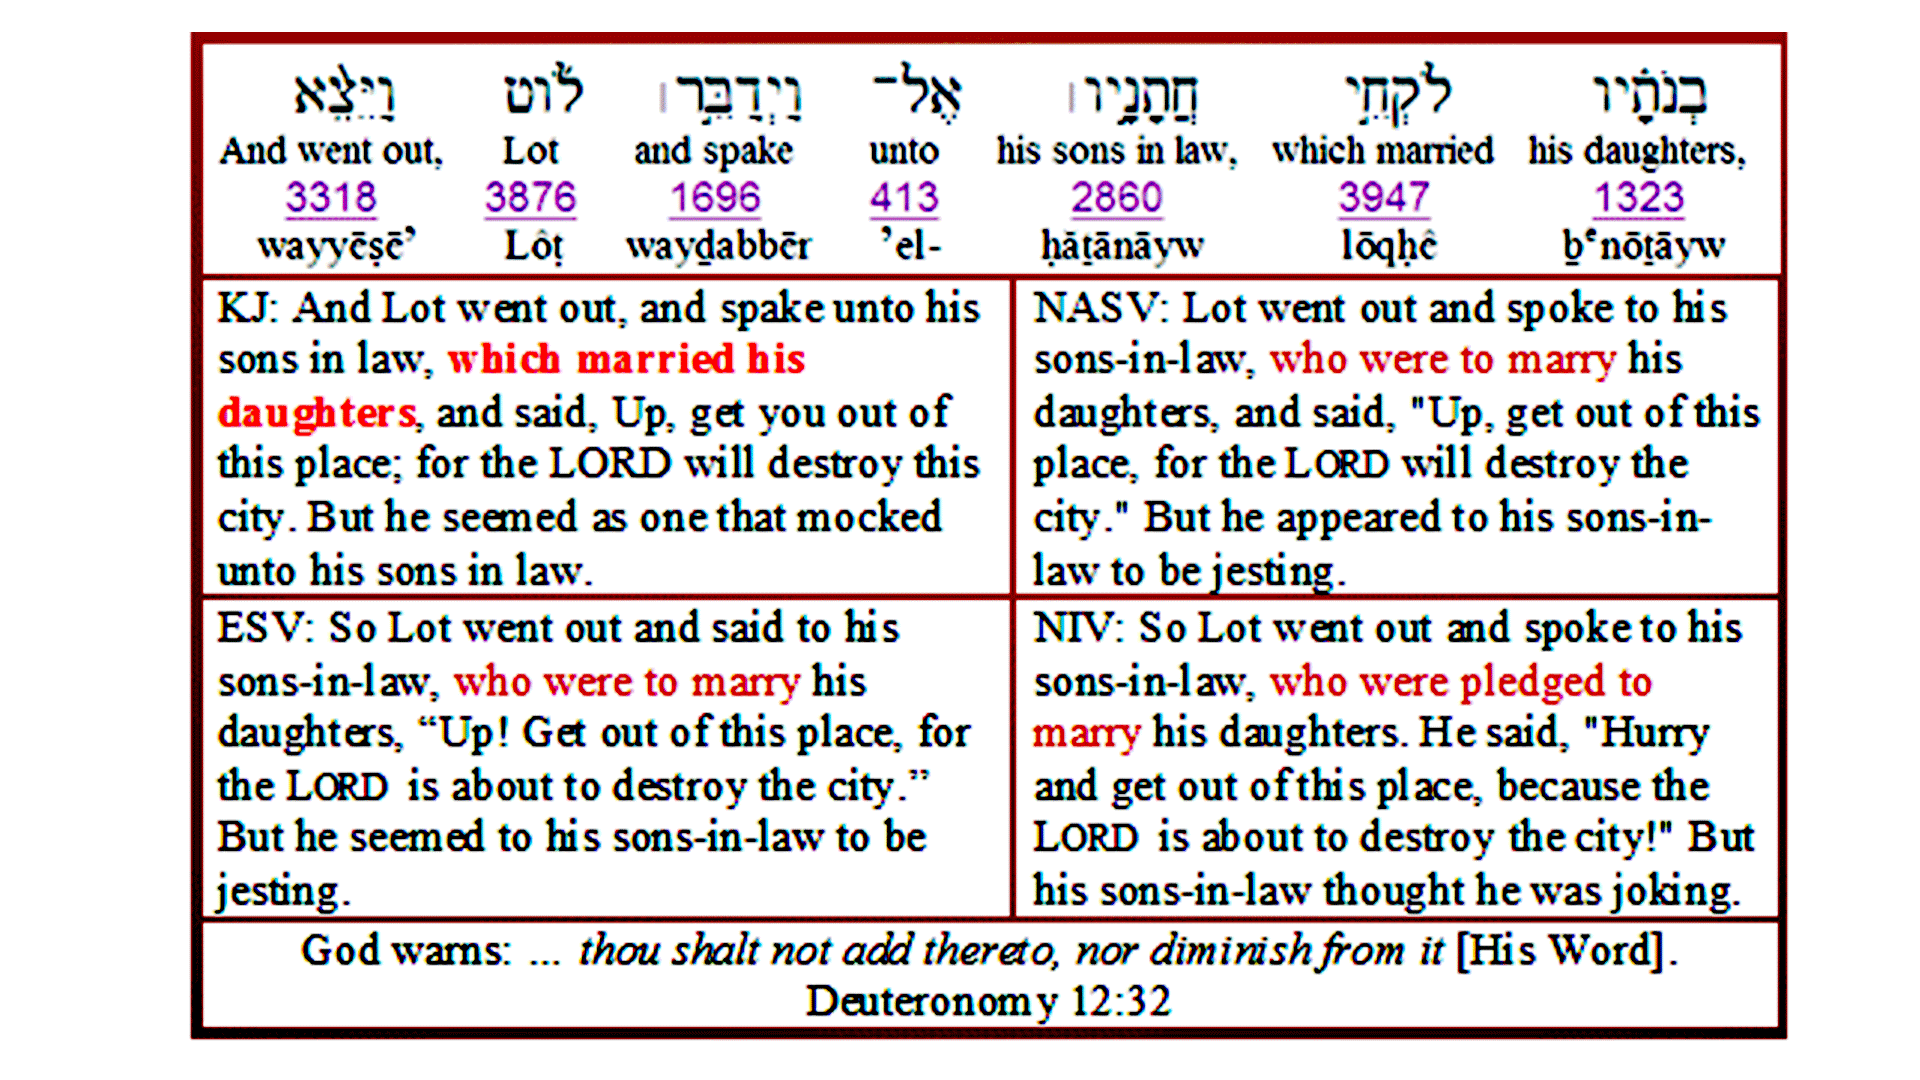 Hebrew text for Genesis 19:14 showing only KJ Bible has it correct. NASV, ESV, and NIV all corrupt the text.